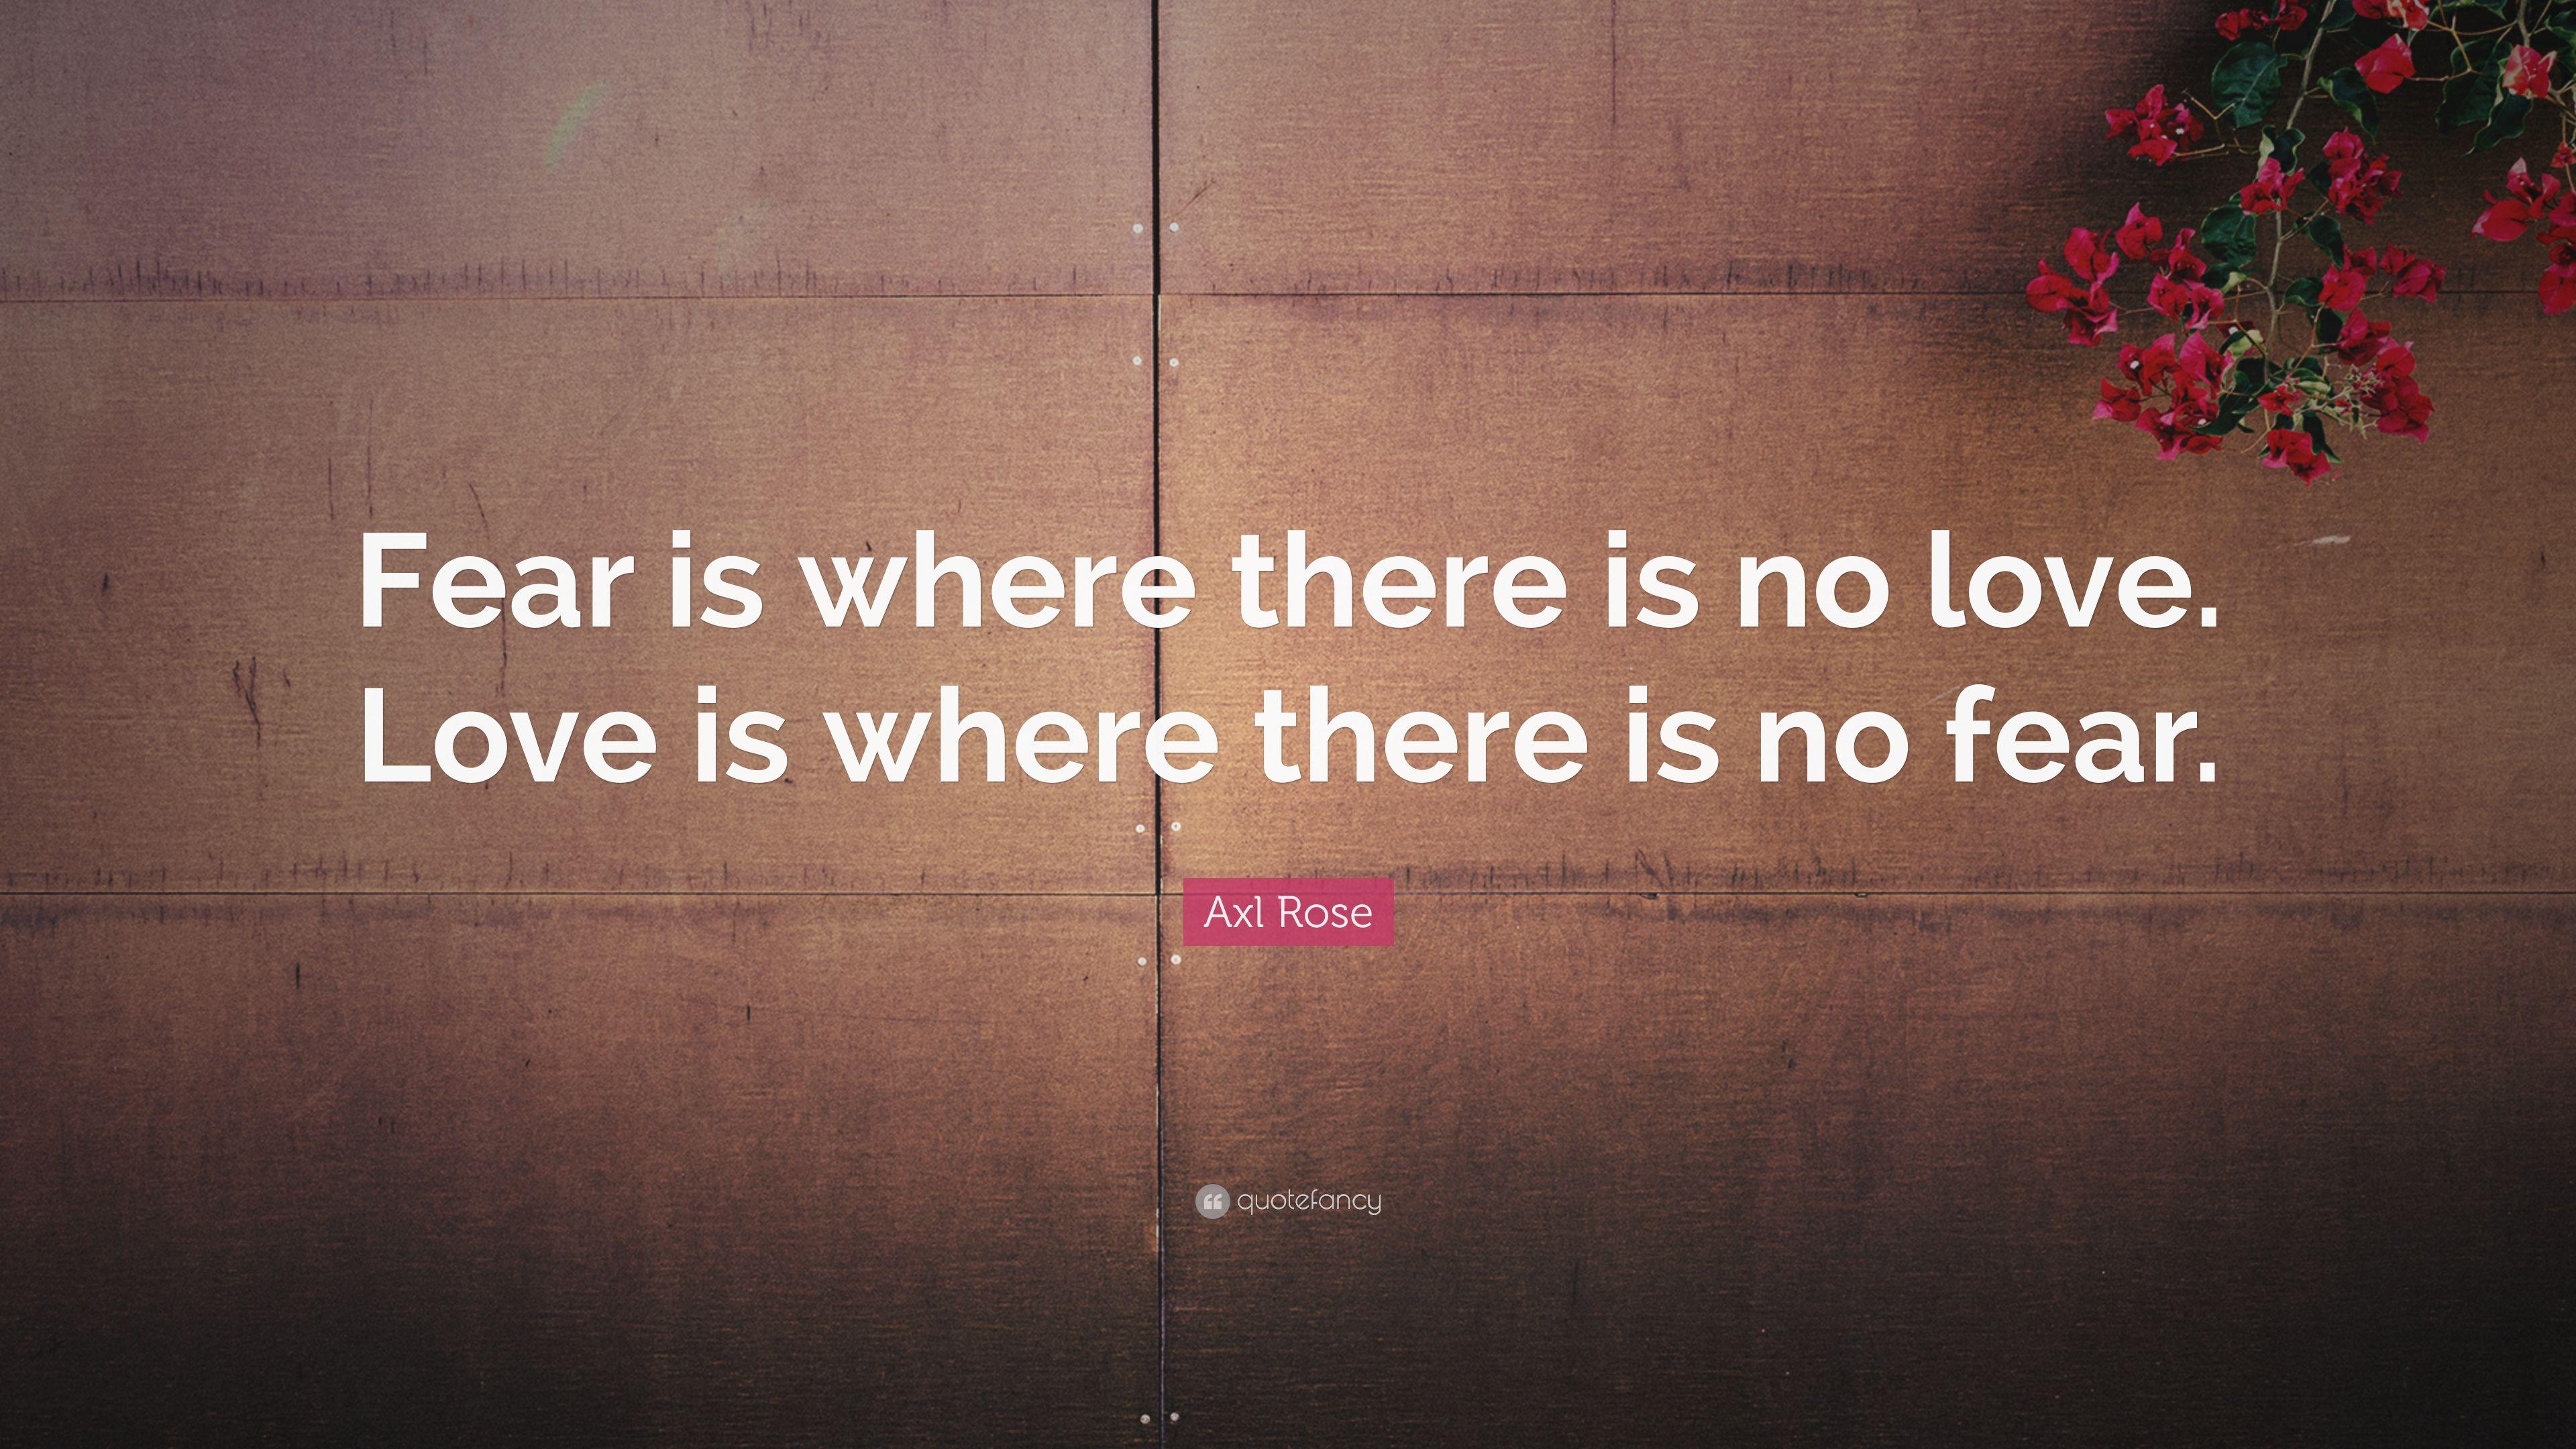 Axl Rose Quote: “Fear is where there is no love. Love is where there